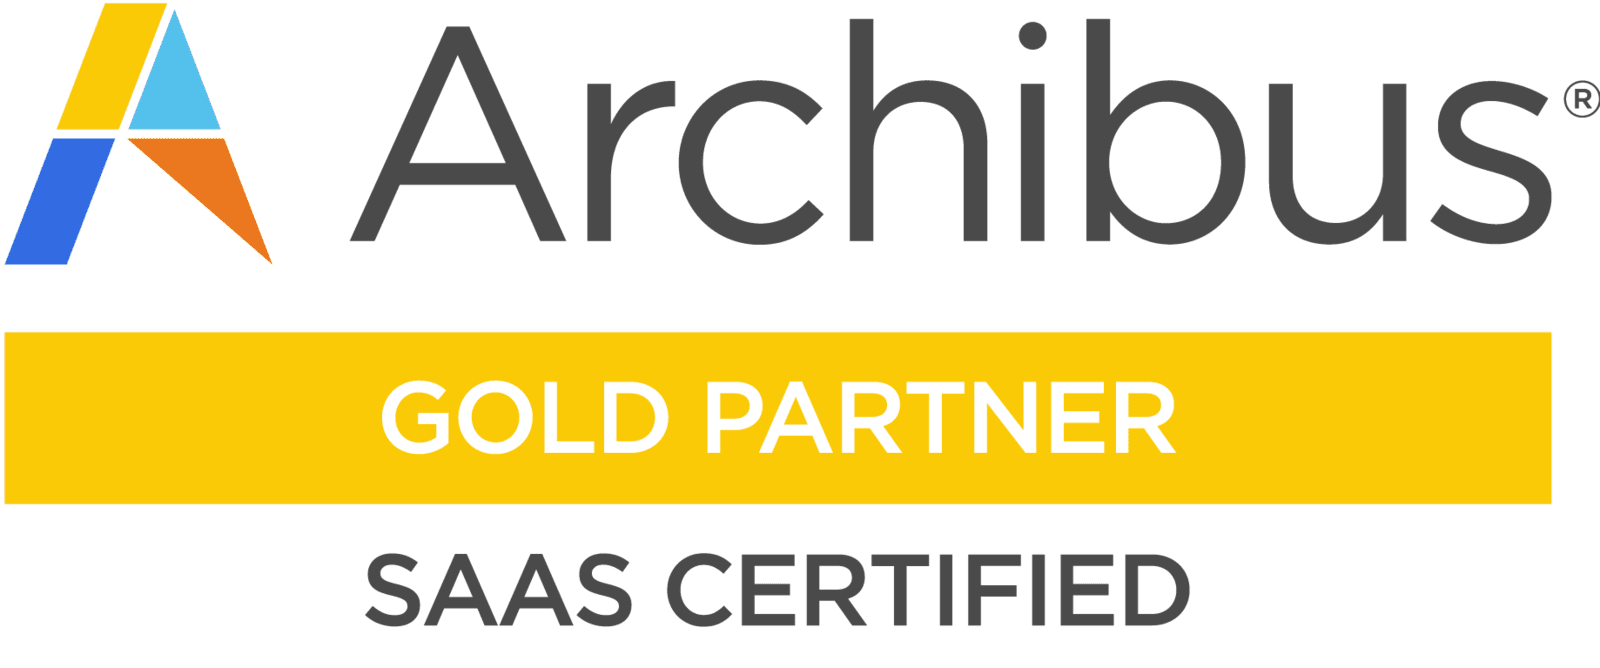 The Archibus Team at Geodata Systems